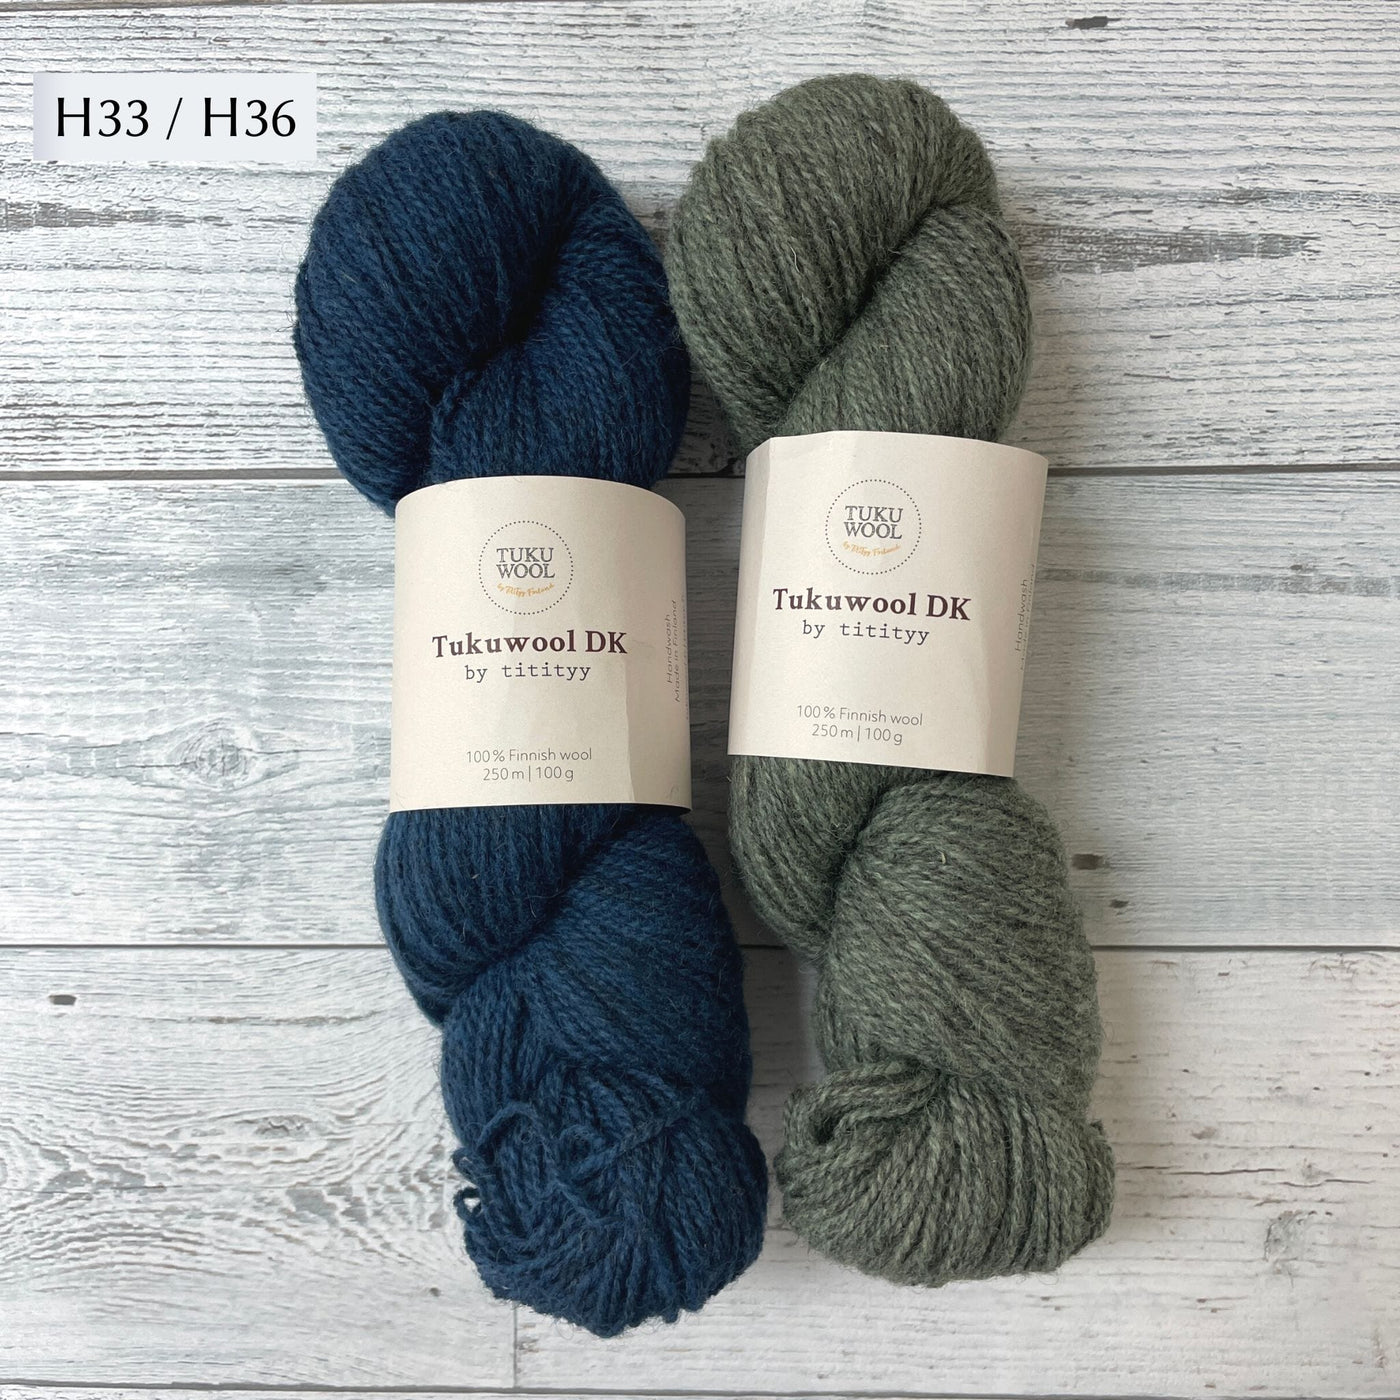 Two Skeins of Tukuwool DK shown as a colorway option for the Muisto Hat & Mittens Set. H33 (heathered blue) and H36 (heathered green grey)